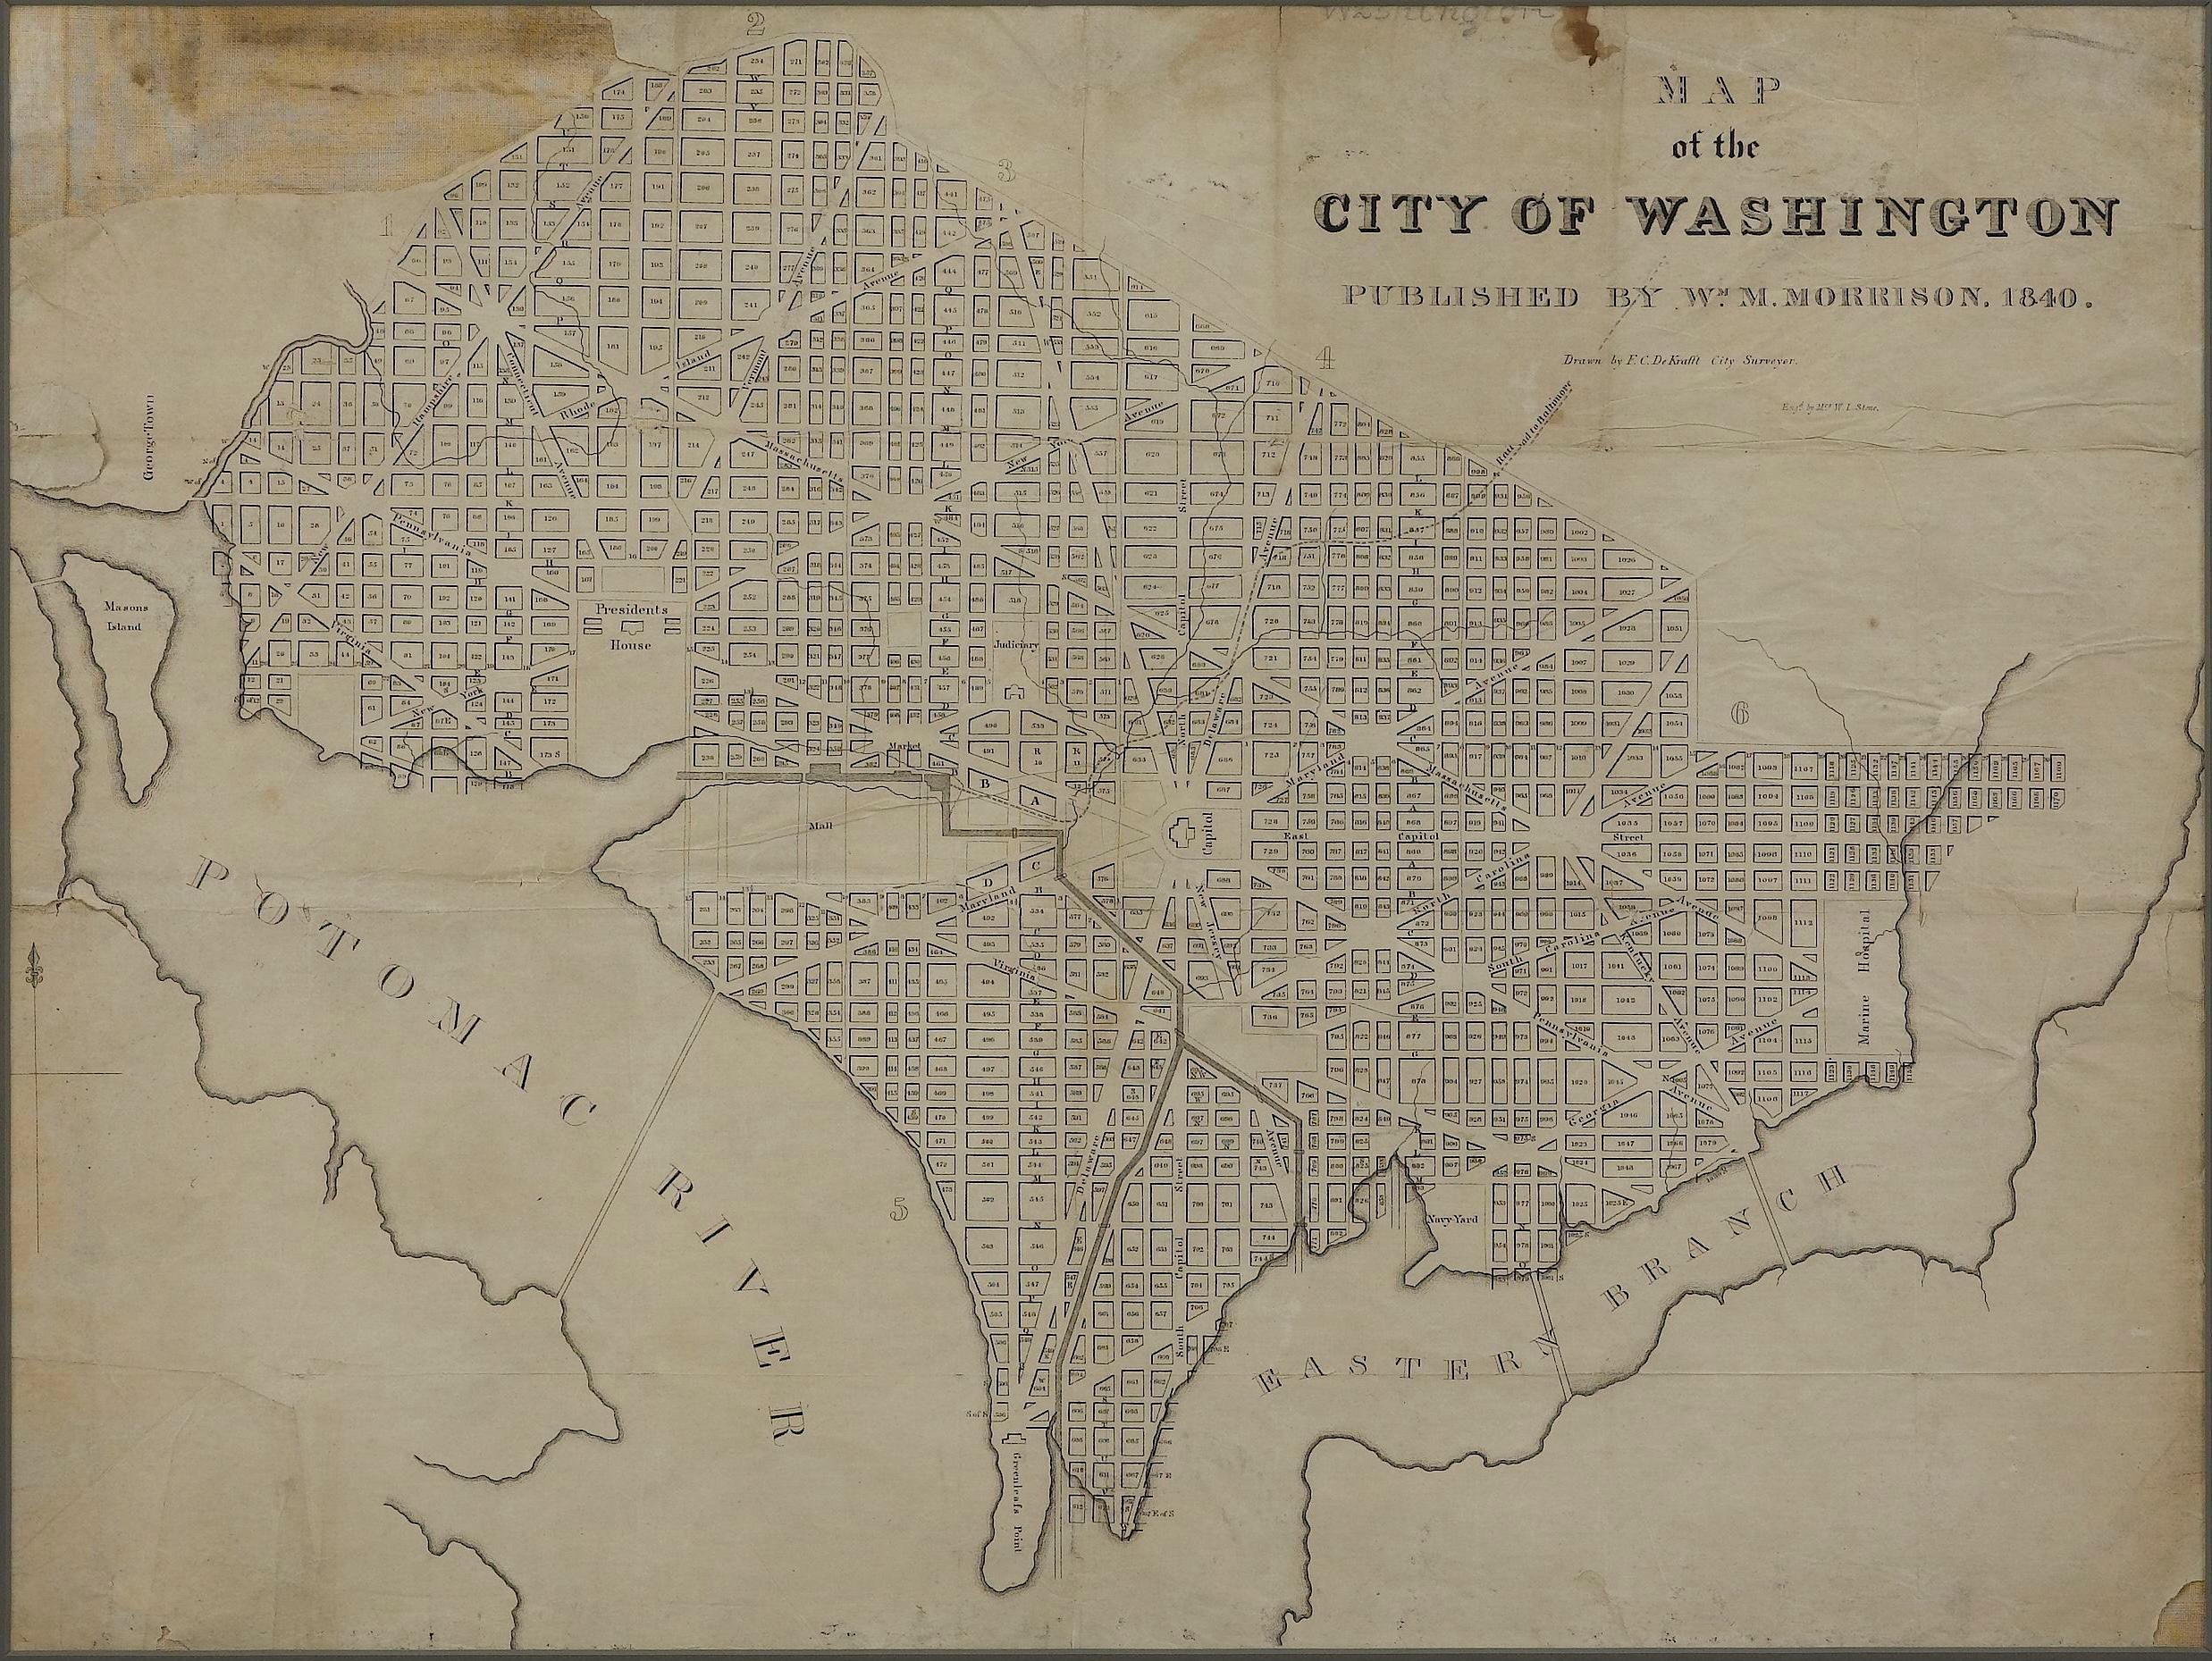 Federal 1840 Map of the City of Washington Published by William M. Morrison For Sale